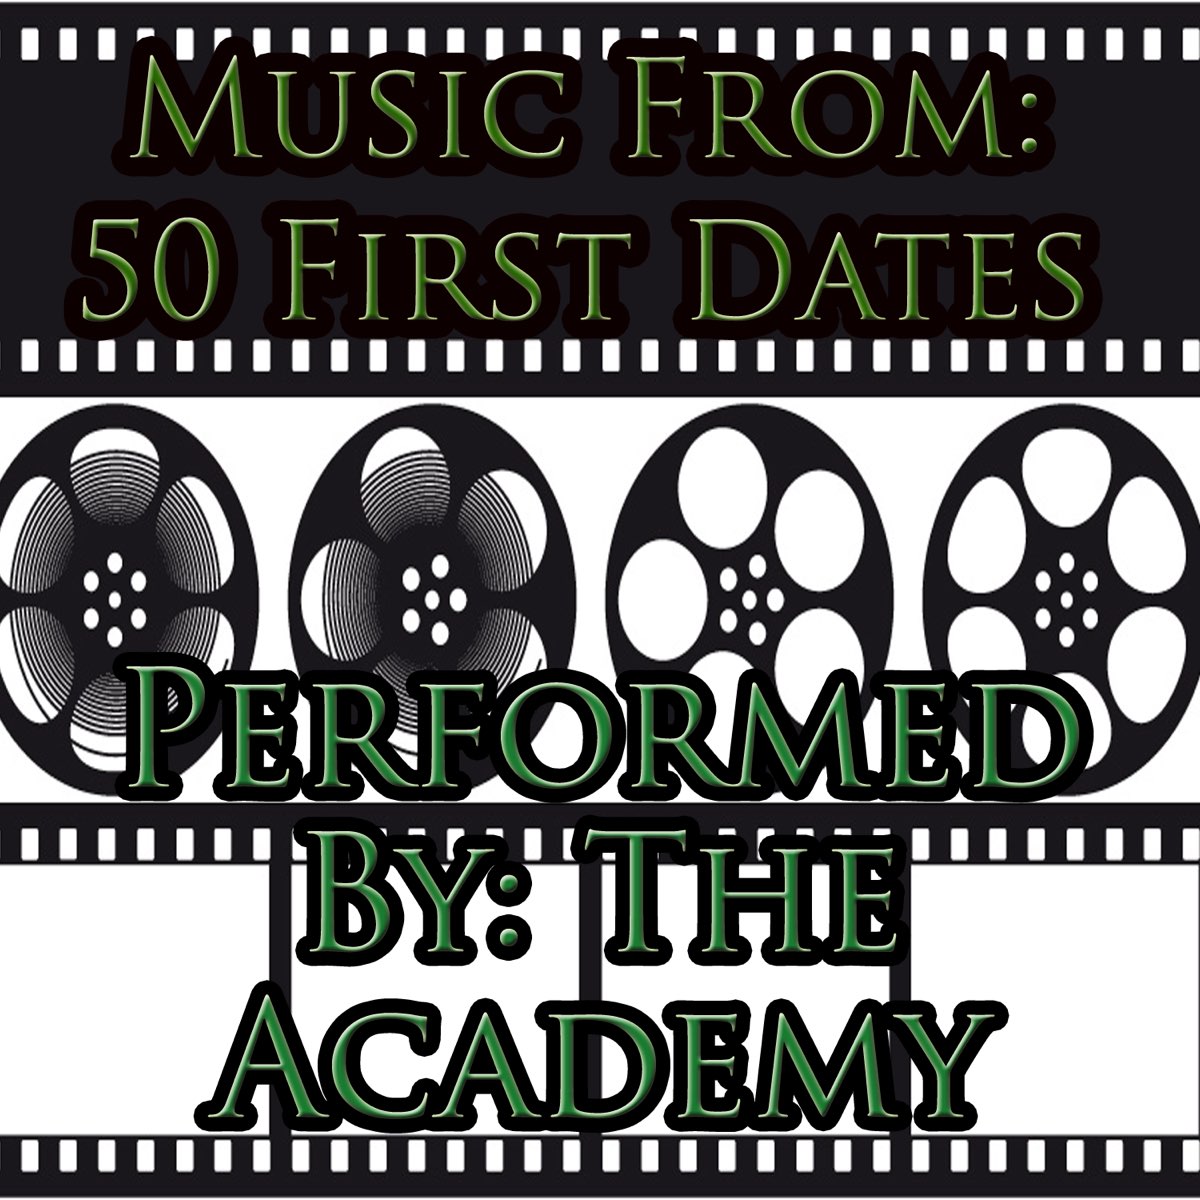 Music From: 50 First Dates - Album by The Academy Allstars - Apple Music